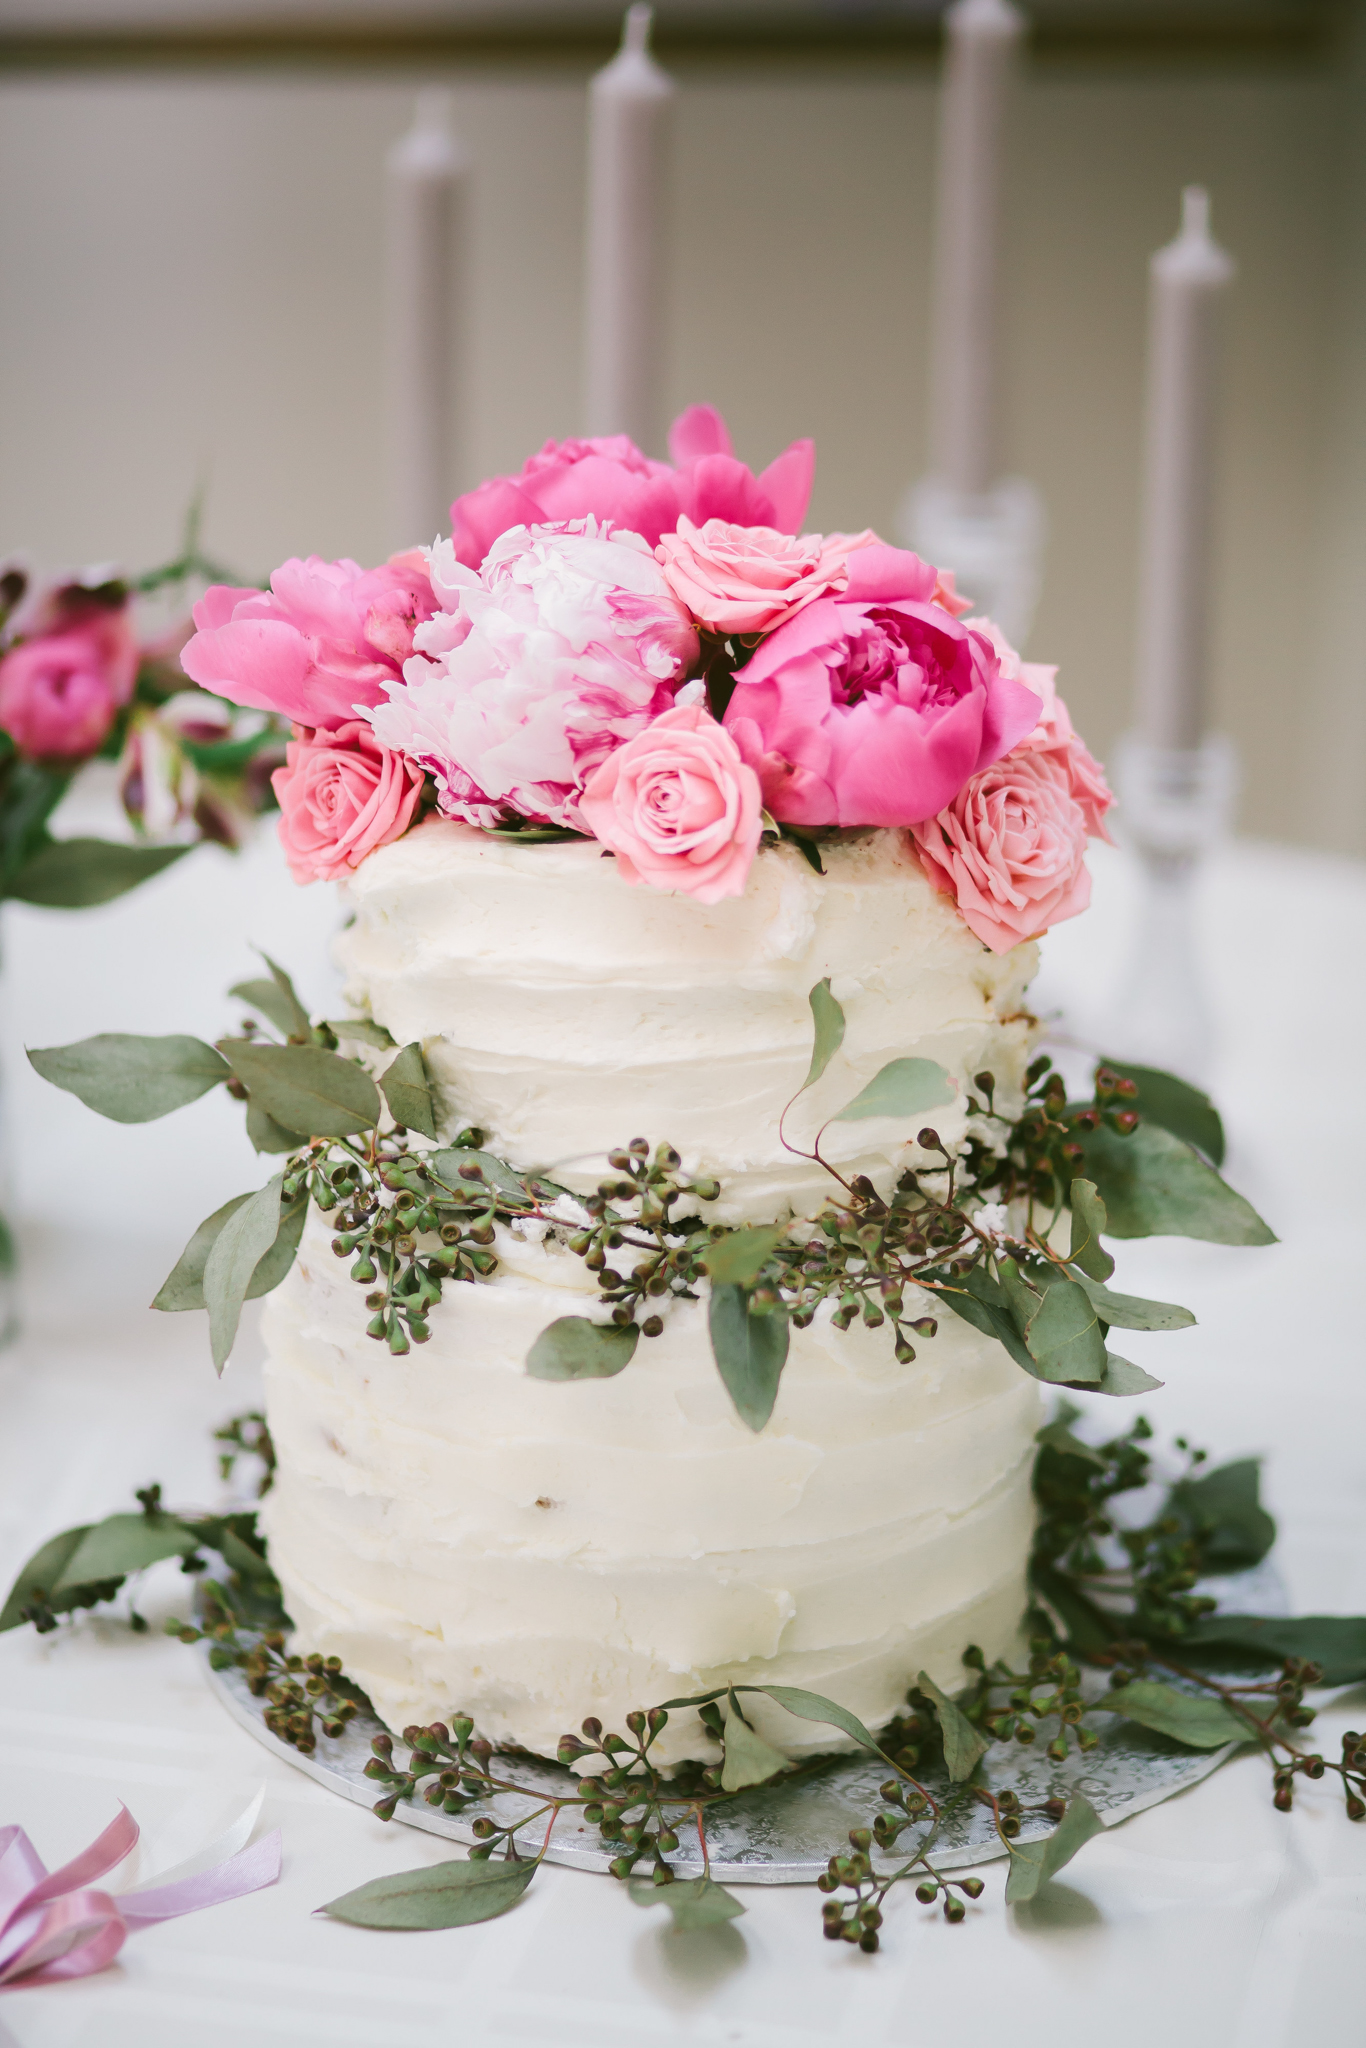 View More: http://michellekarstphotography.pass.us/60thanniversaryparty